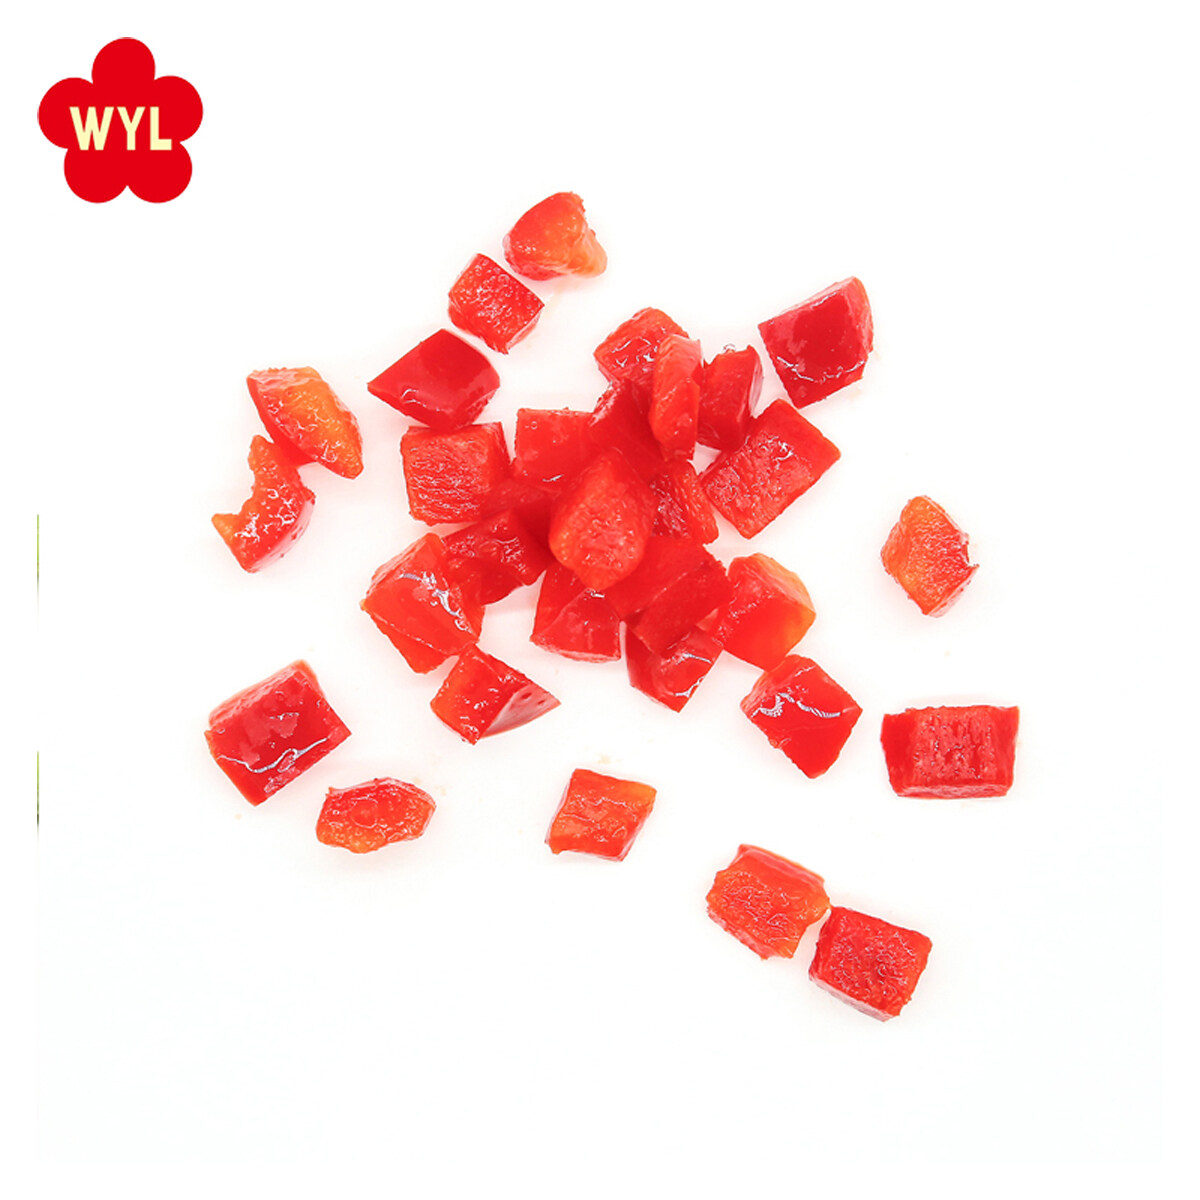 Wholesale frozen pepper and onion mixed, frozen diced peppers Manufacturer, bulk iqf frozen red chilli pepper Factory